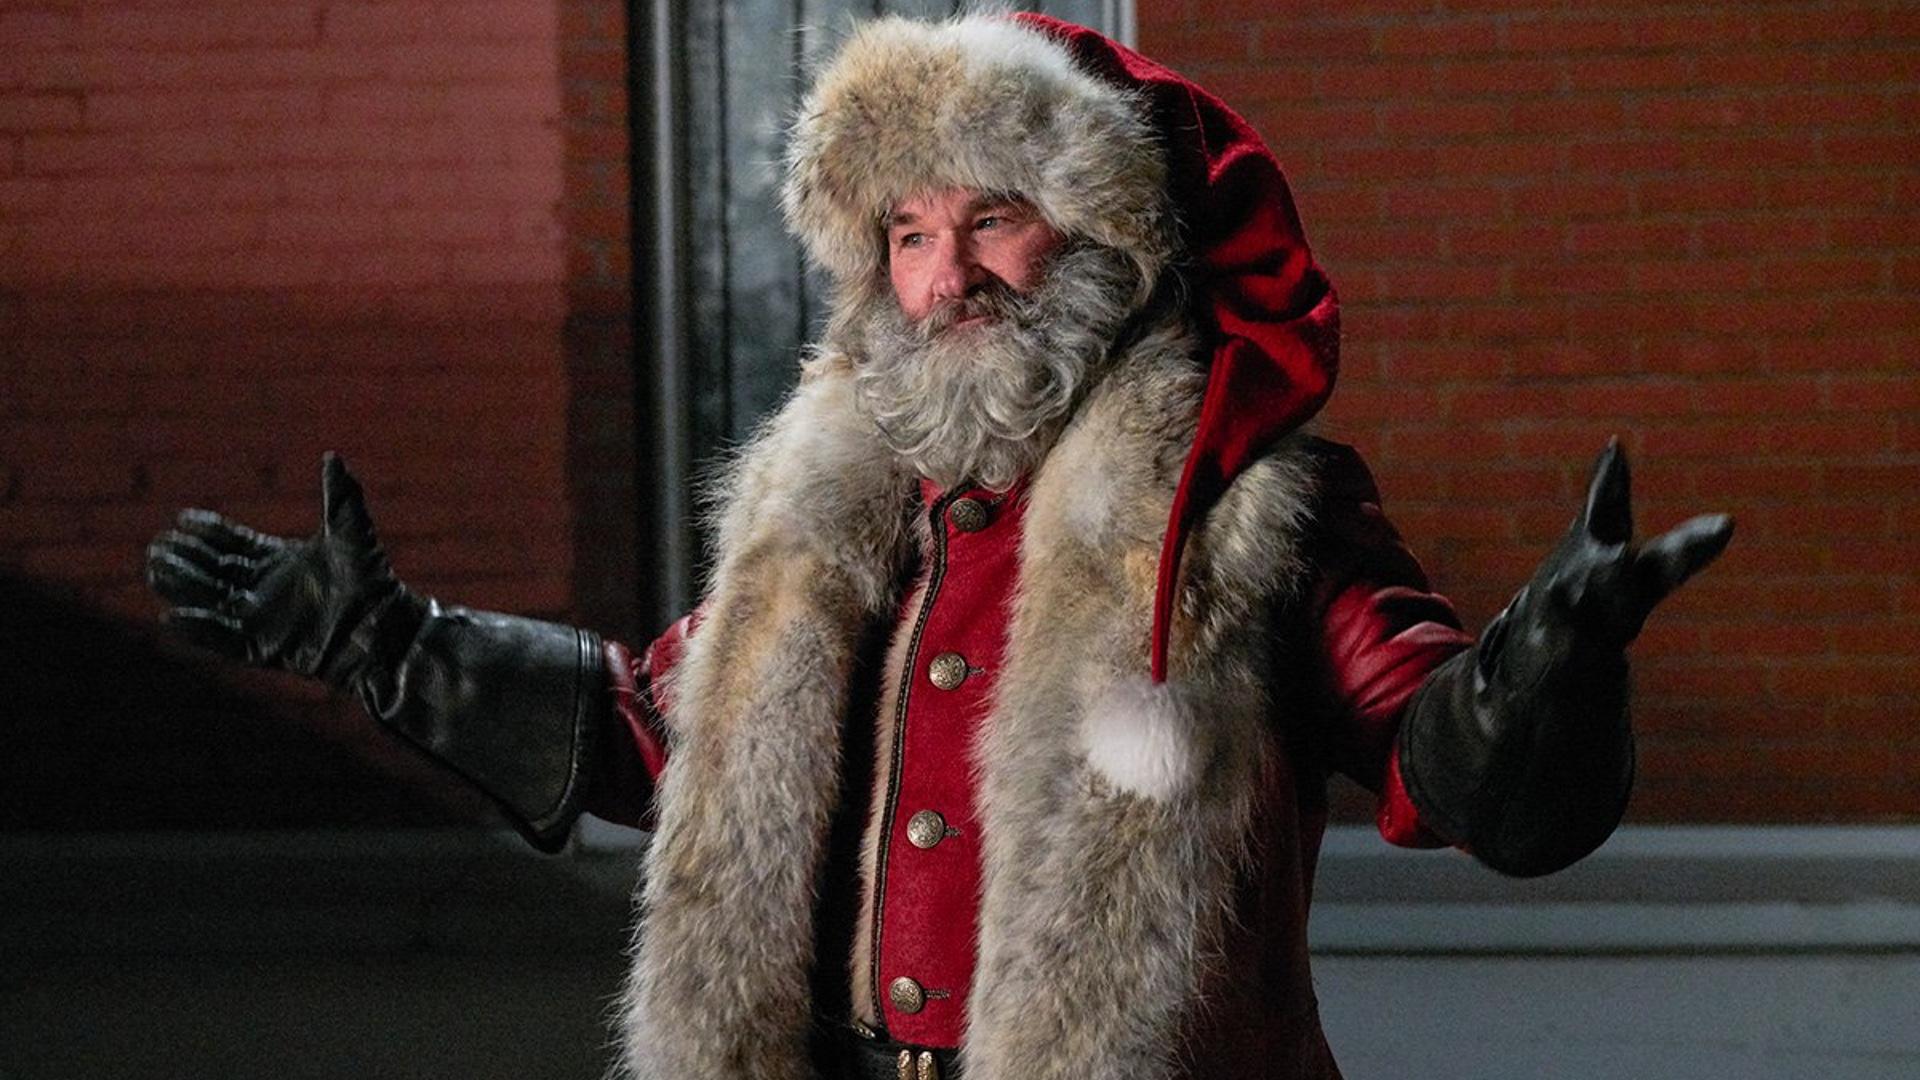 New For Kurt Russell's Santa Claus Movie THE